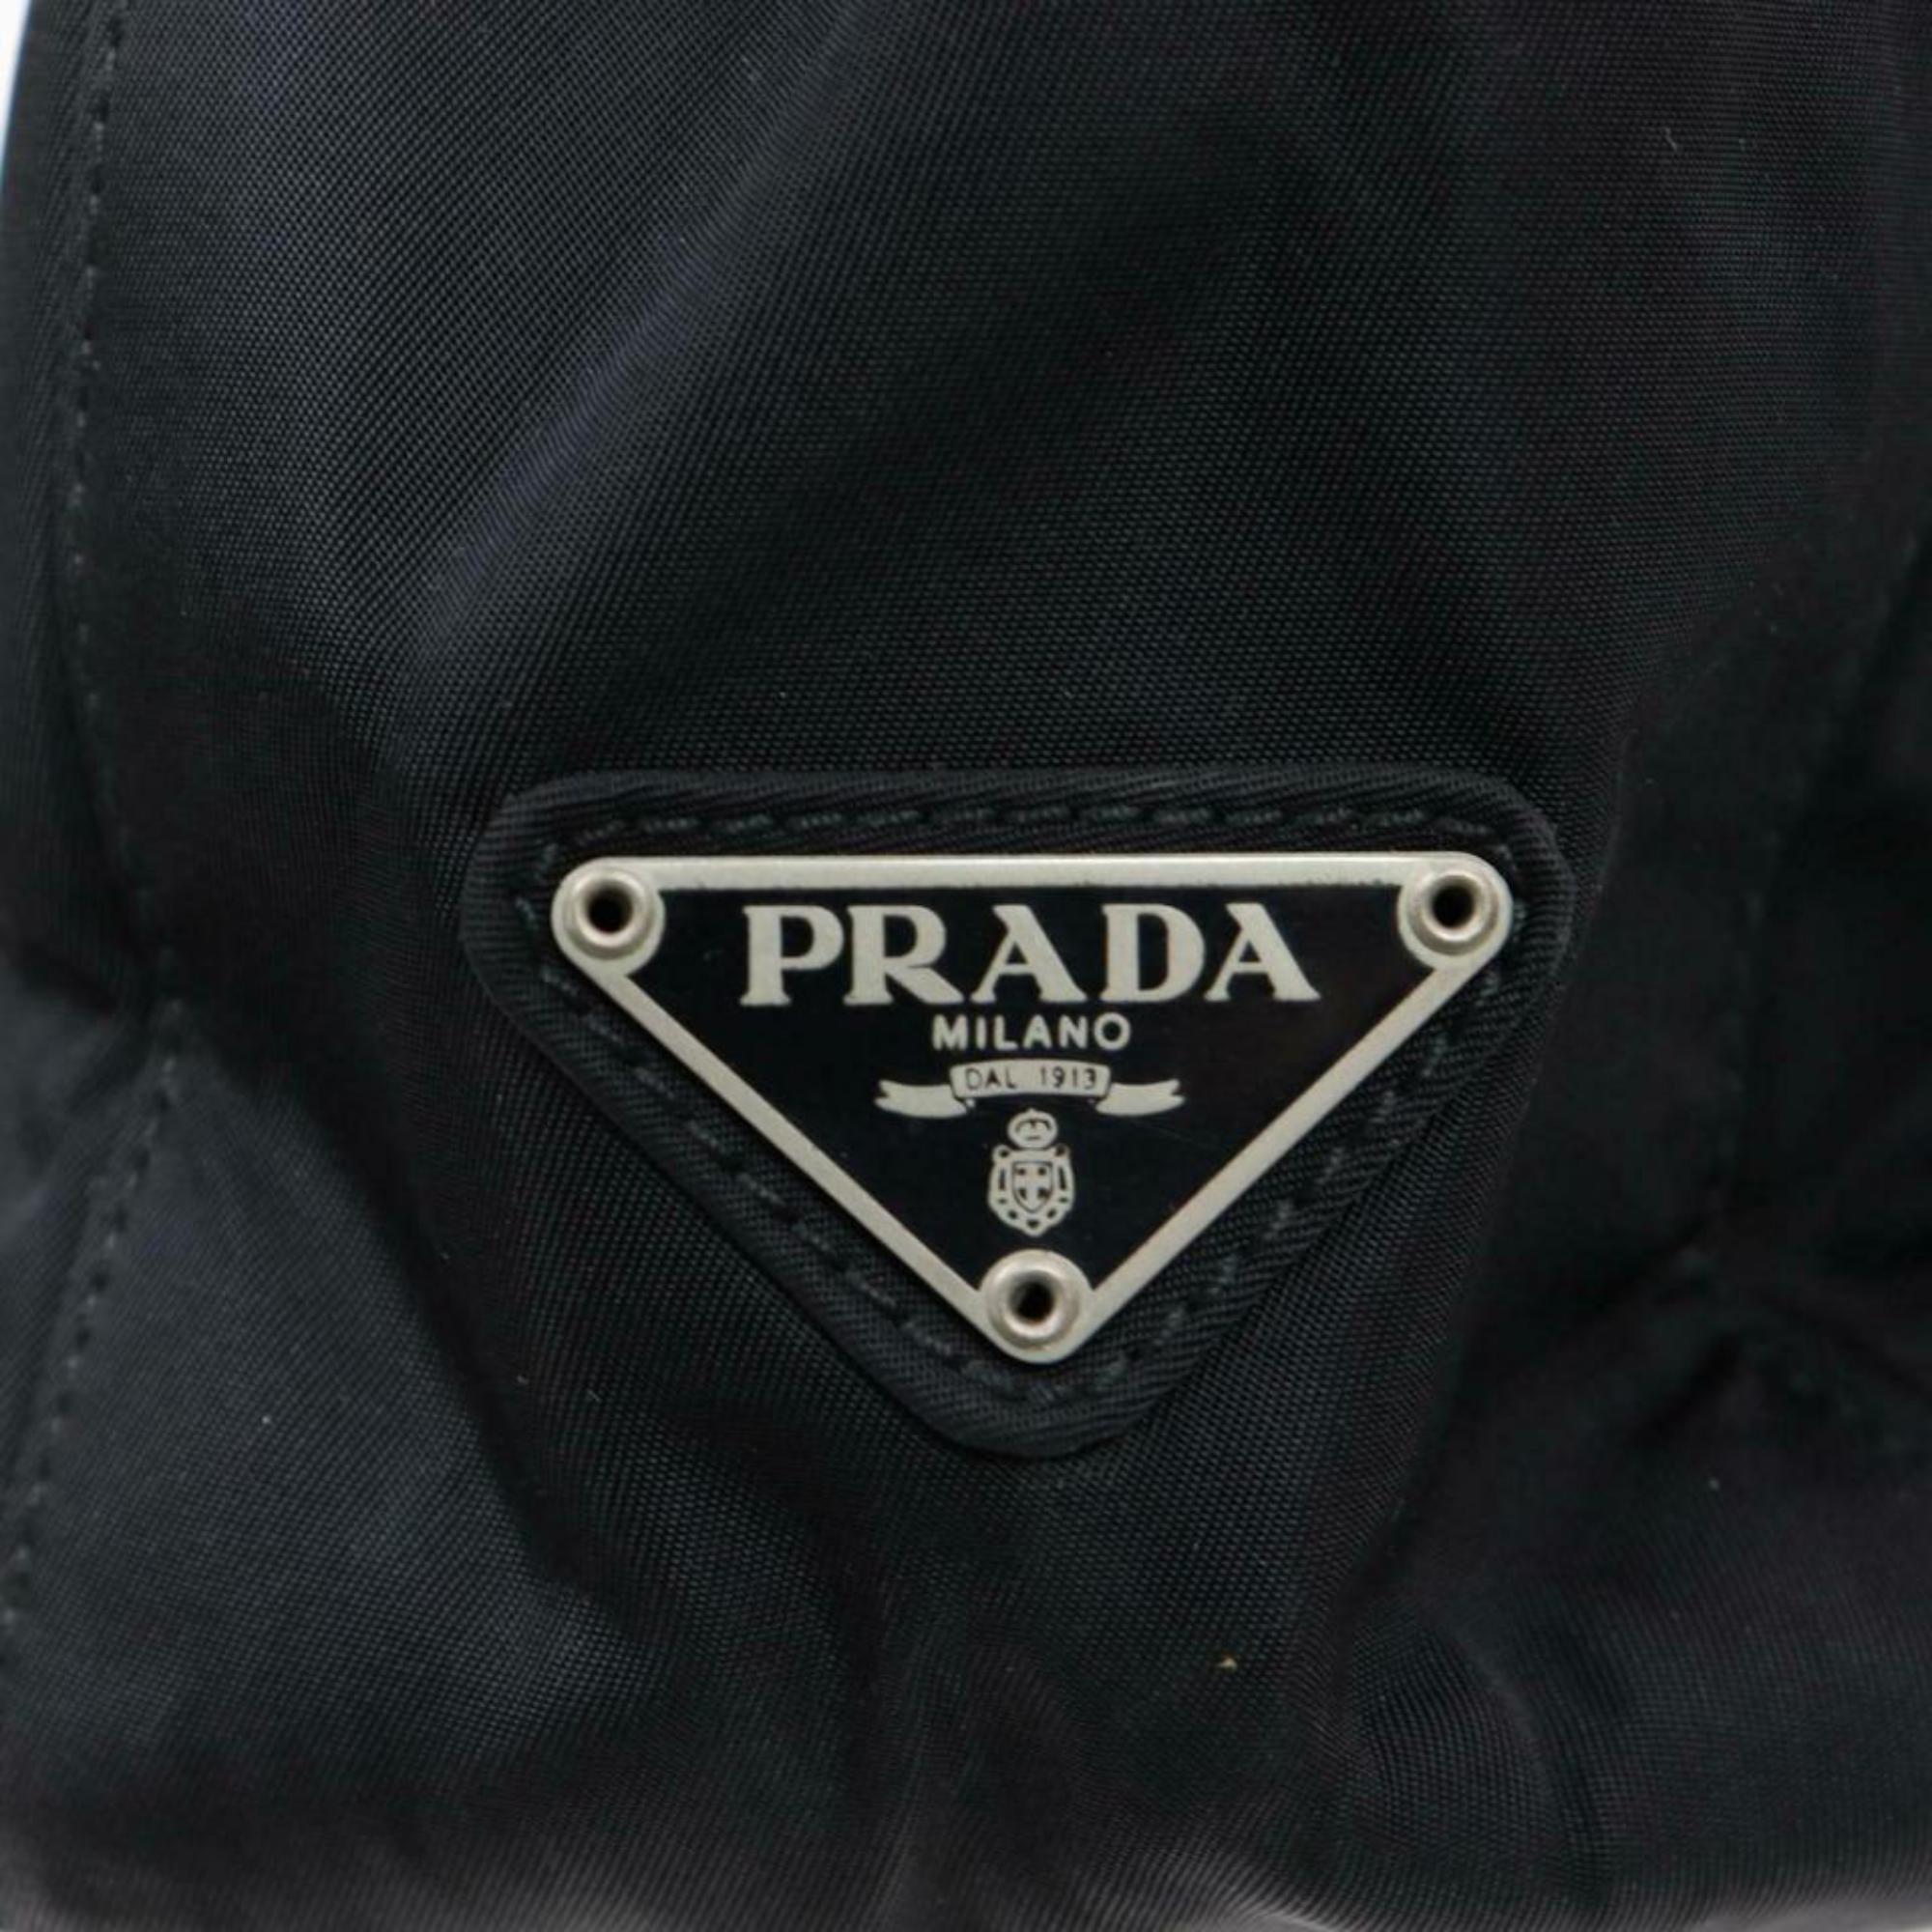 Prada Chain Tote 870605 Black Nylon Shoulder Bag In Excellent Condition For Sale In Forest Hills, NY